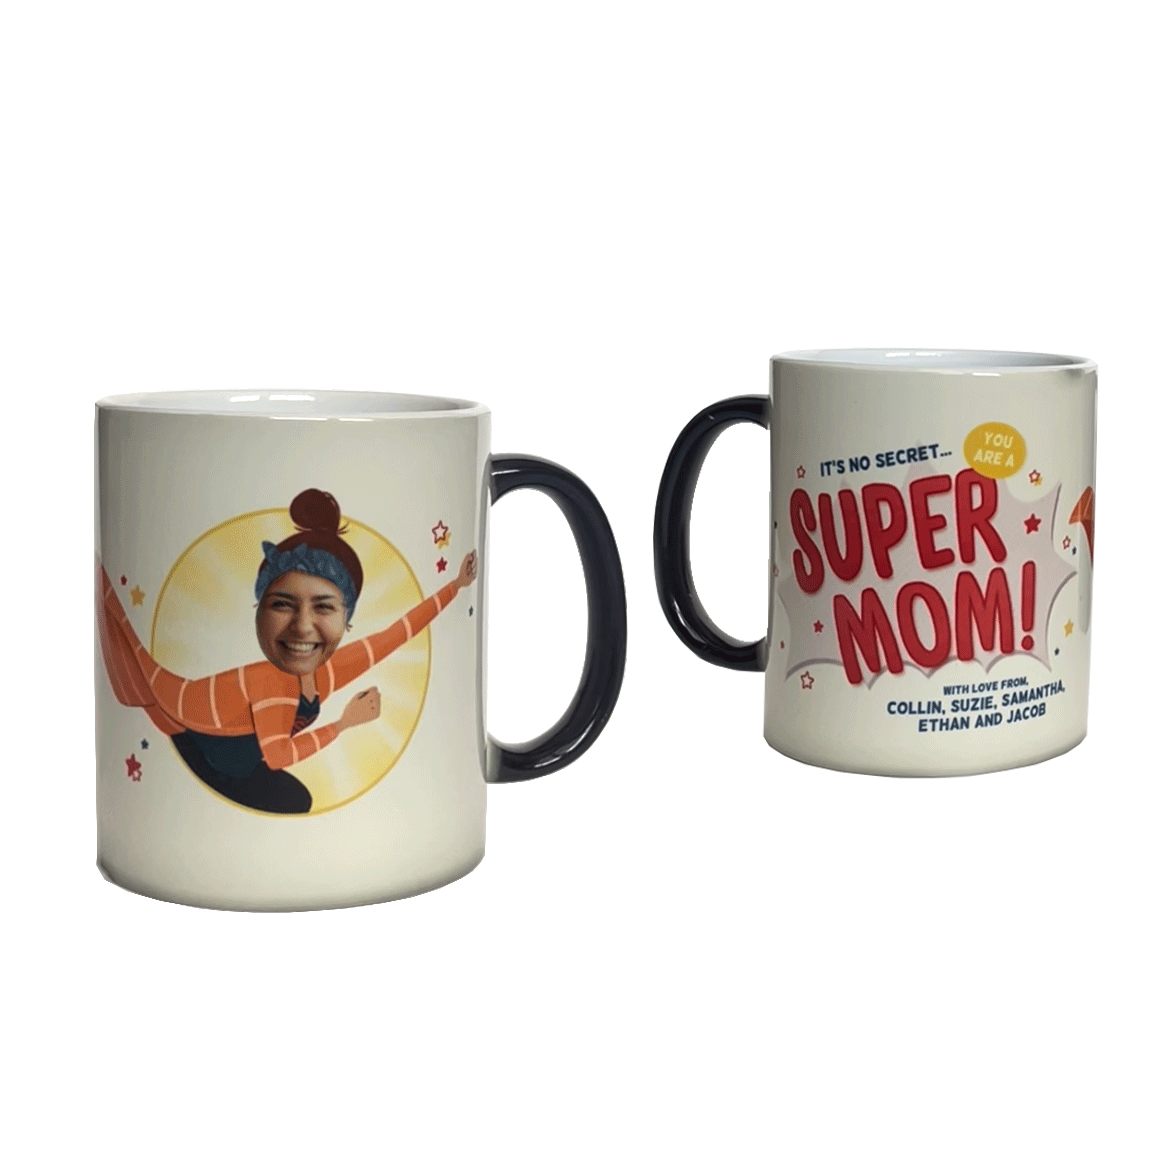 Super Mom Personalized Book and Color-Changing Mug Gift Set